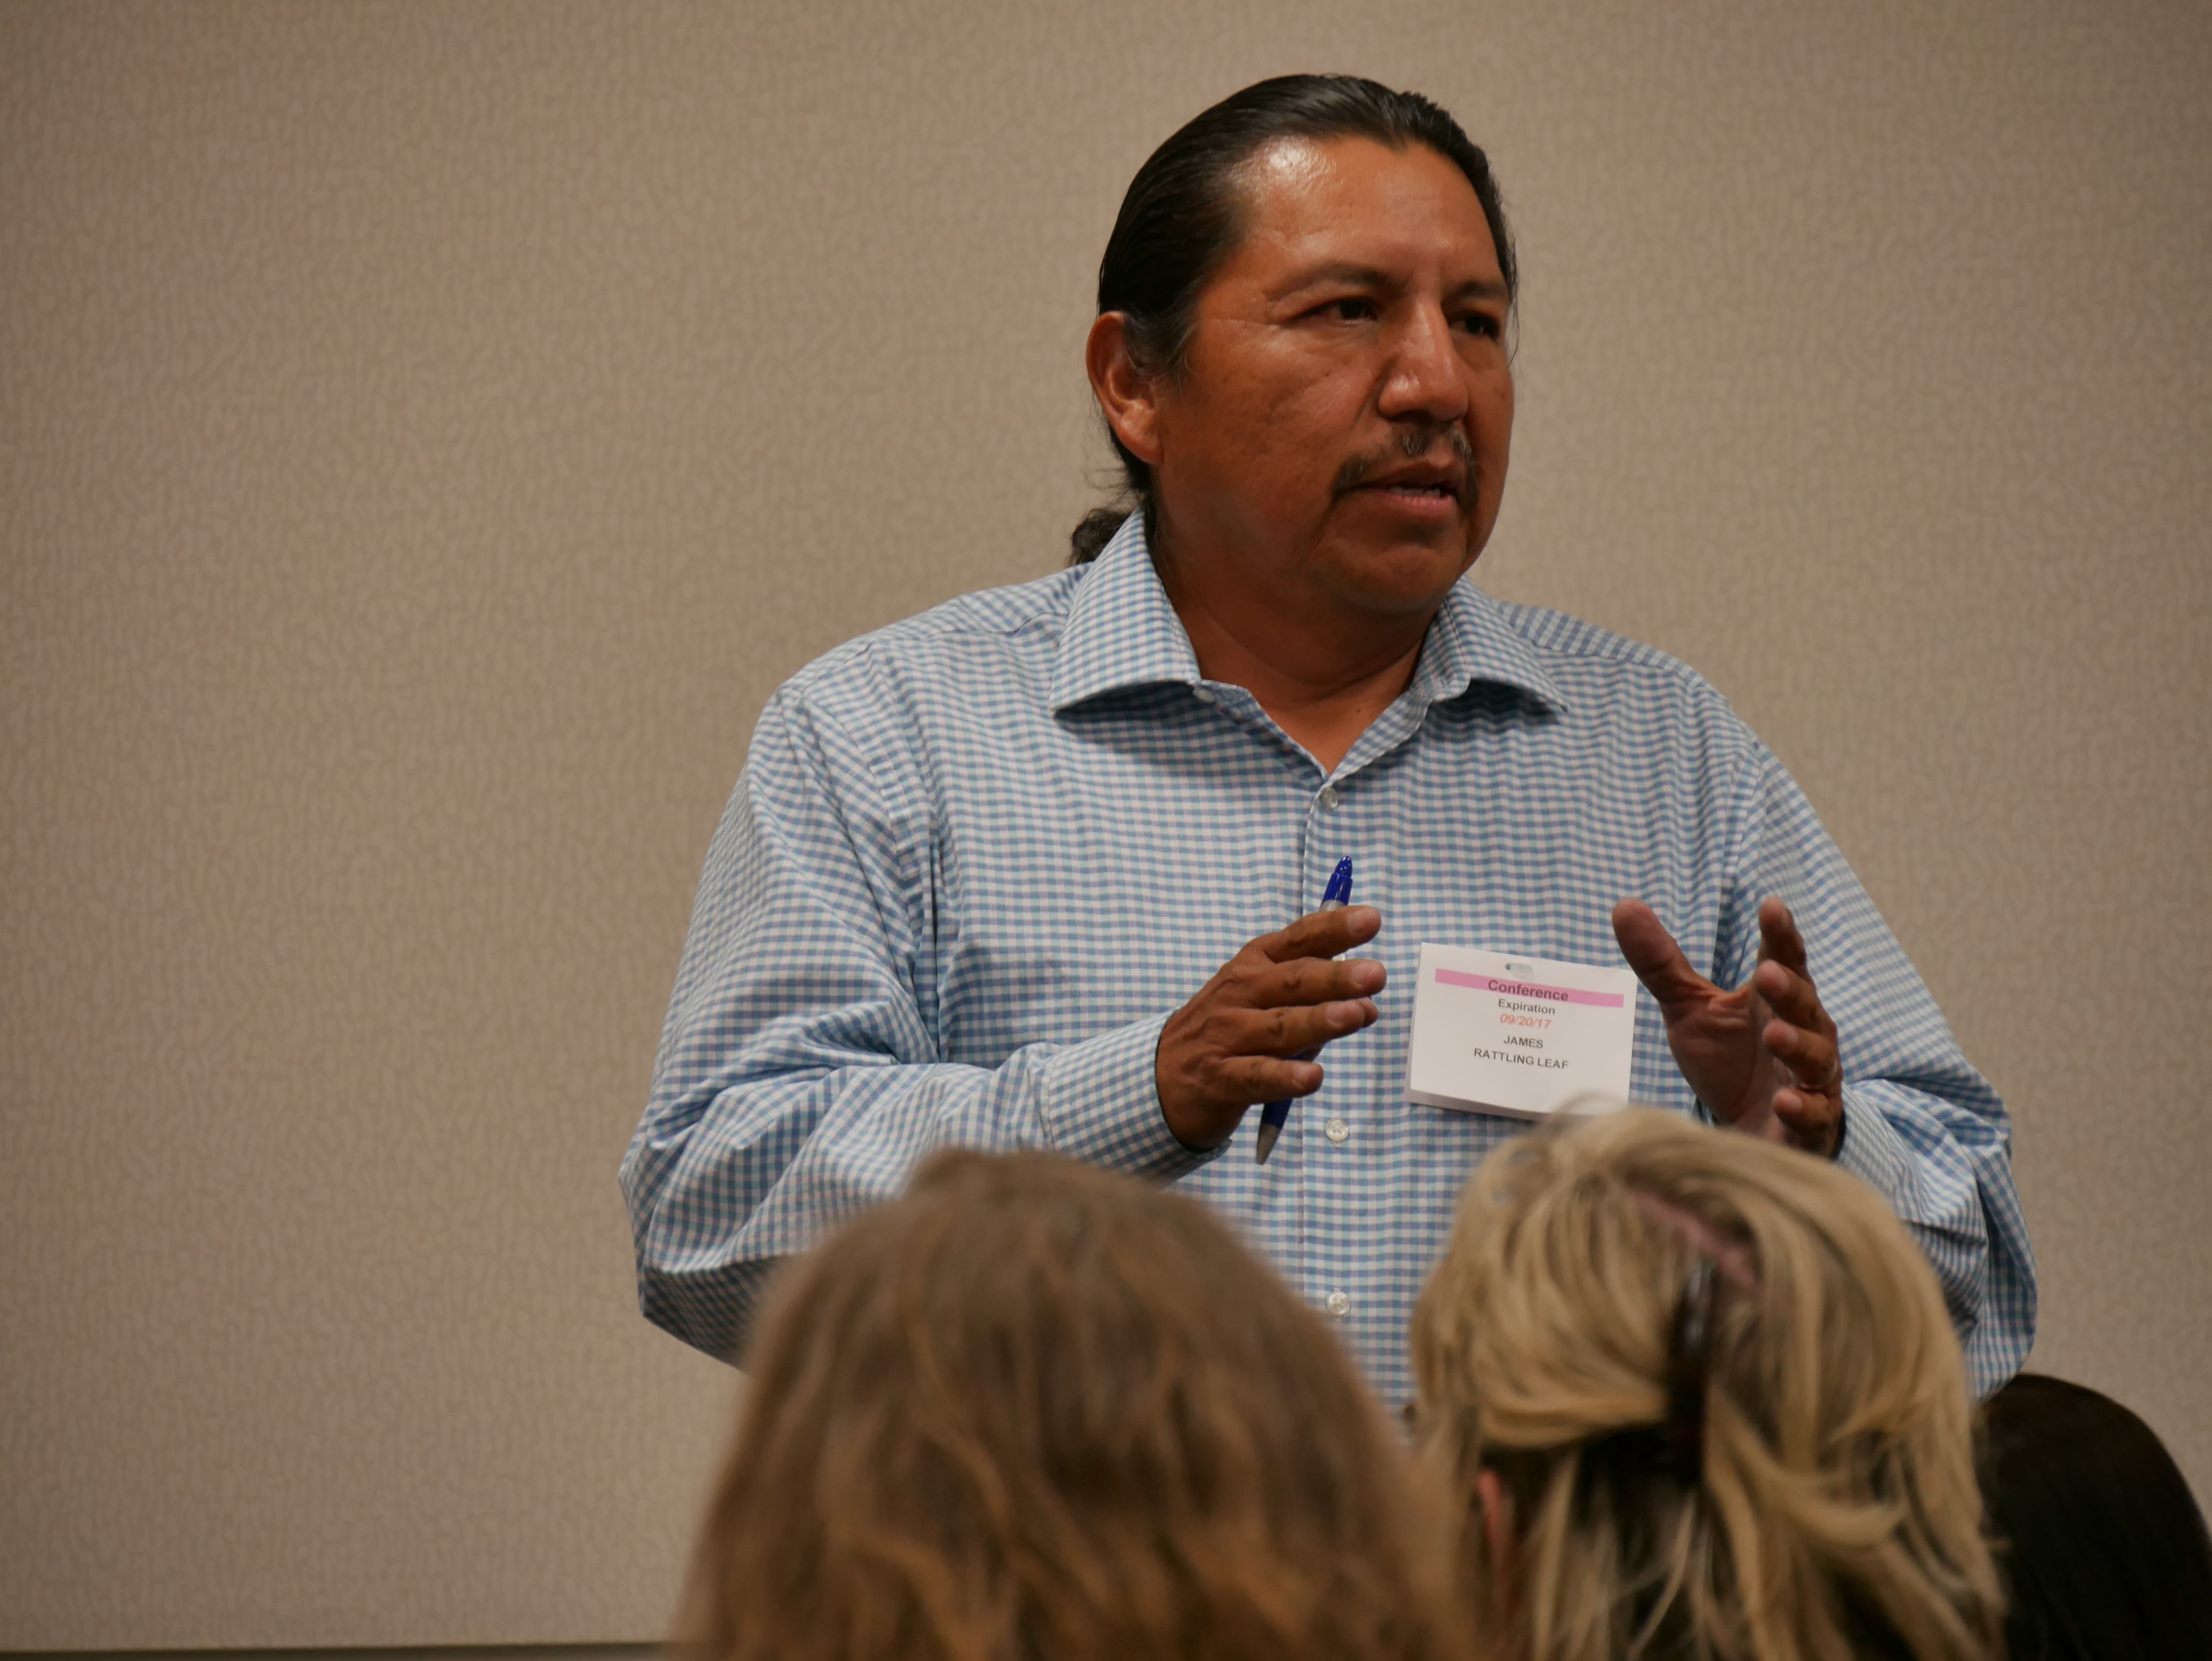 James Rattling Leaf speaks at NOAA Tribal College and Universities Science Day in Boulder, Colorado.